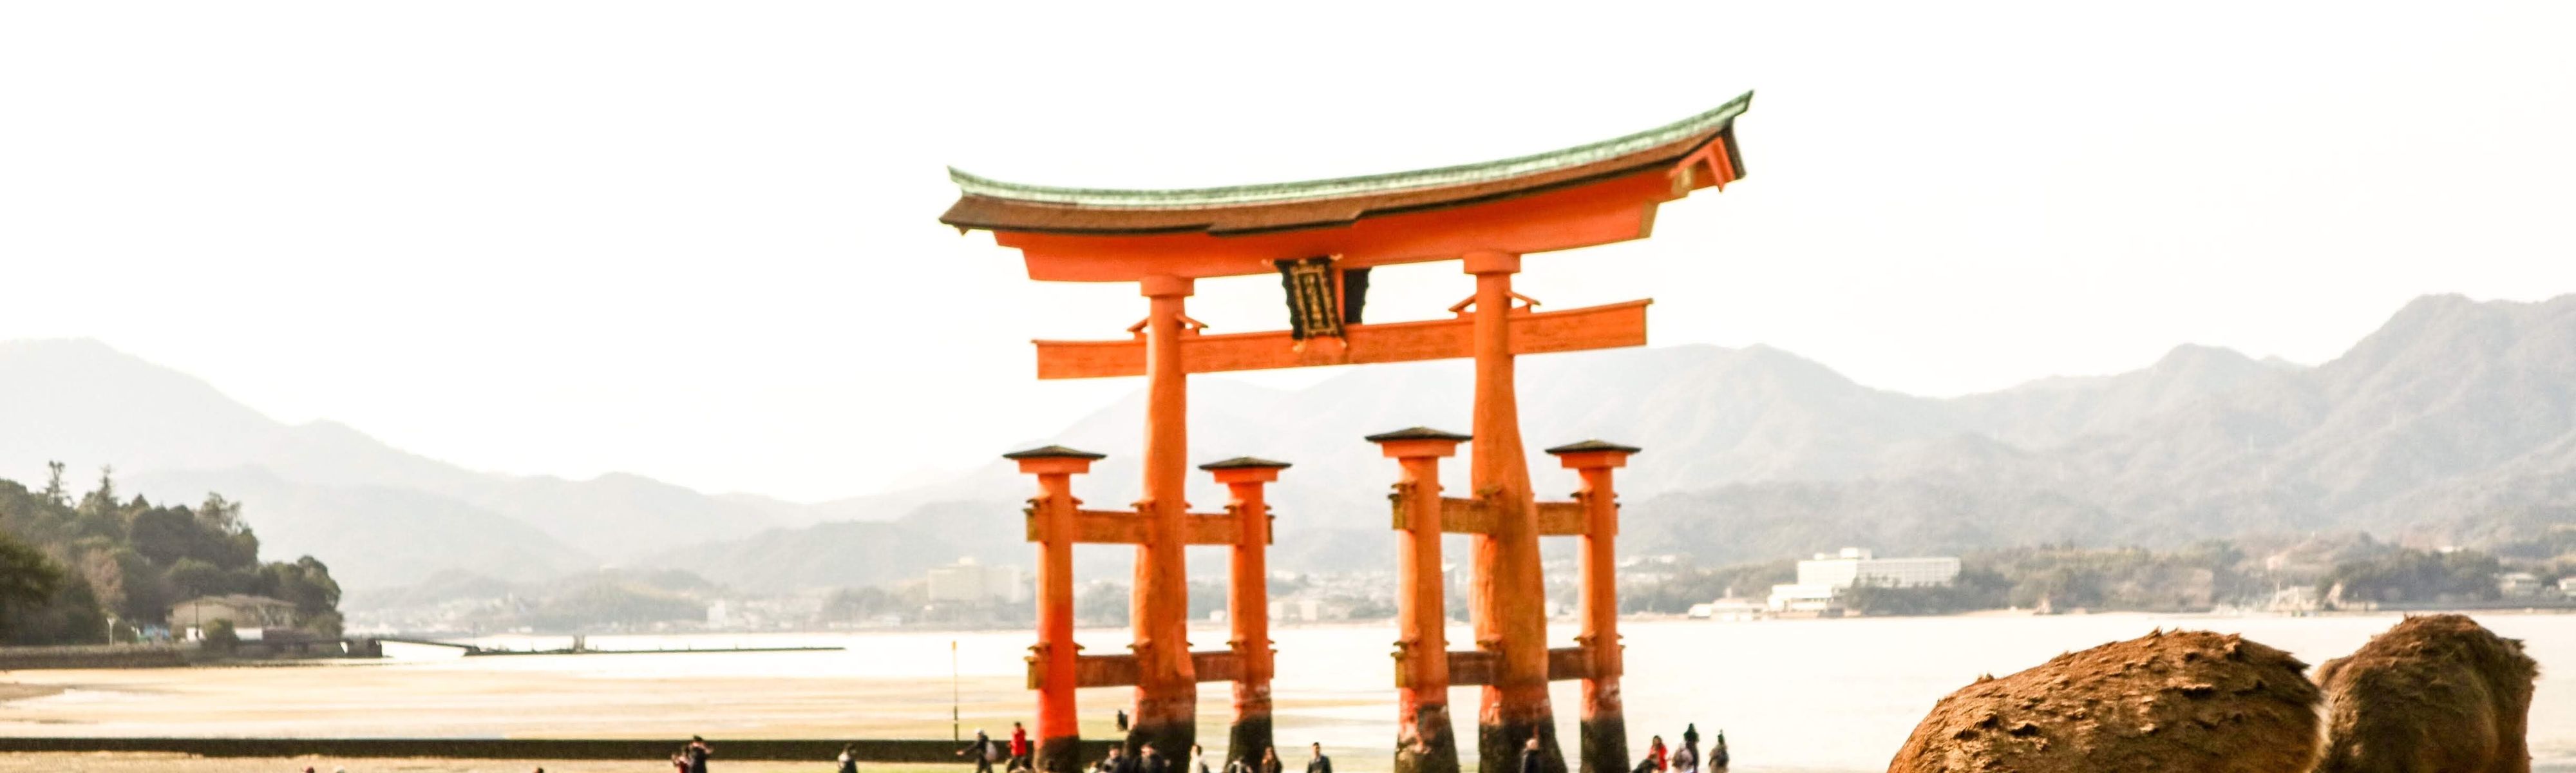 people standing in front of Itsukushima shrine in hakone